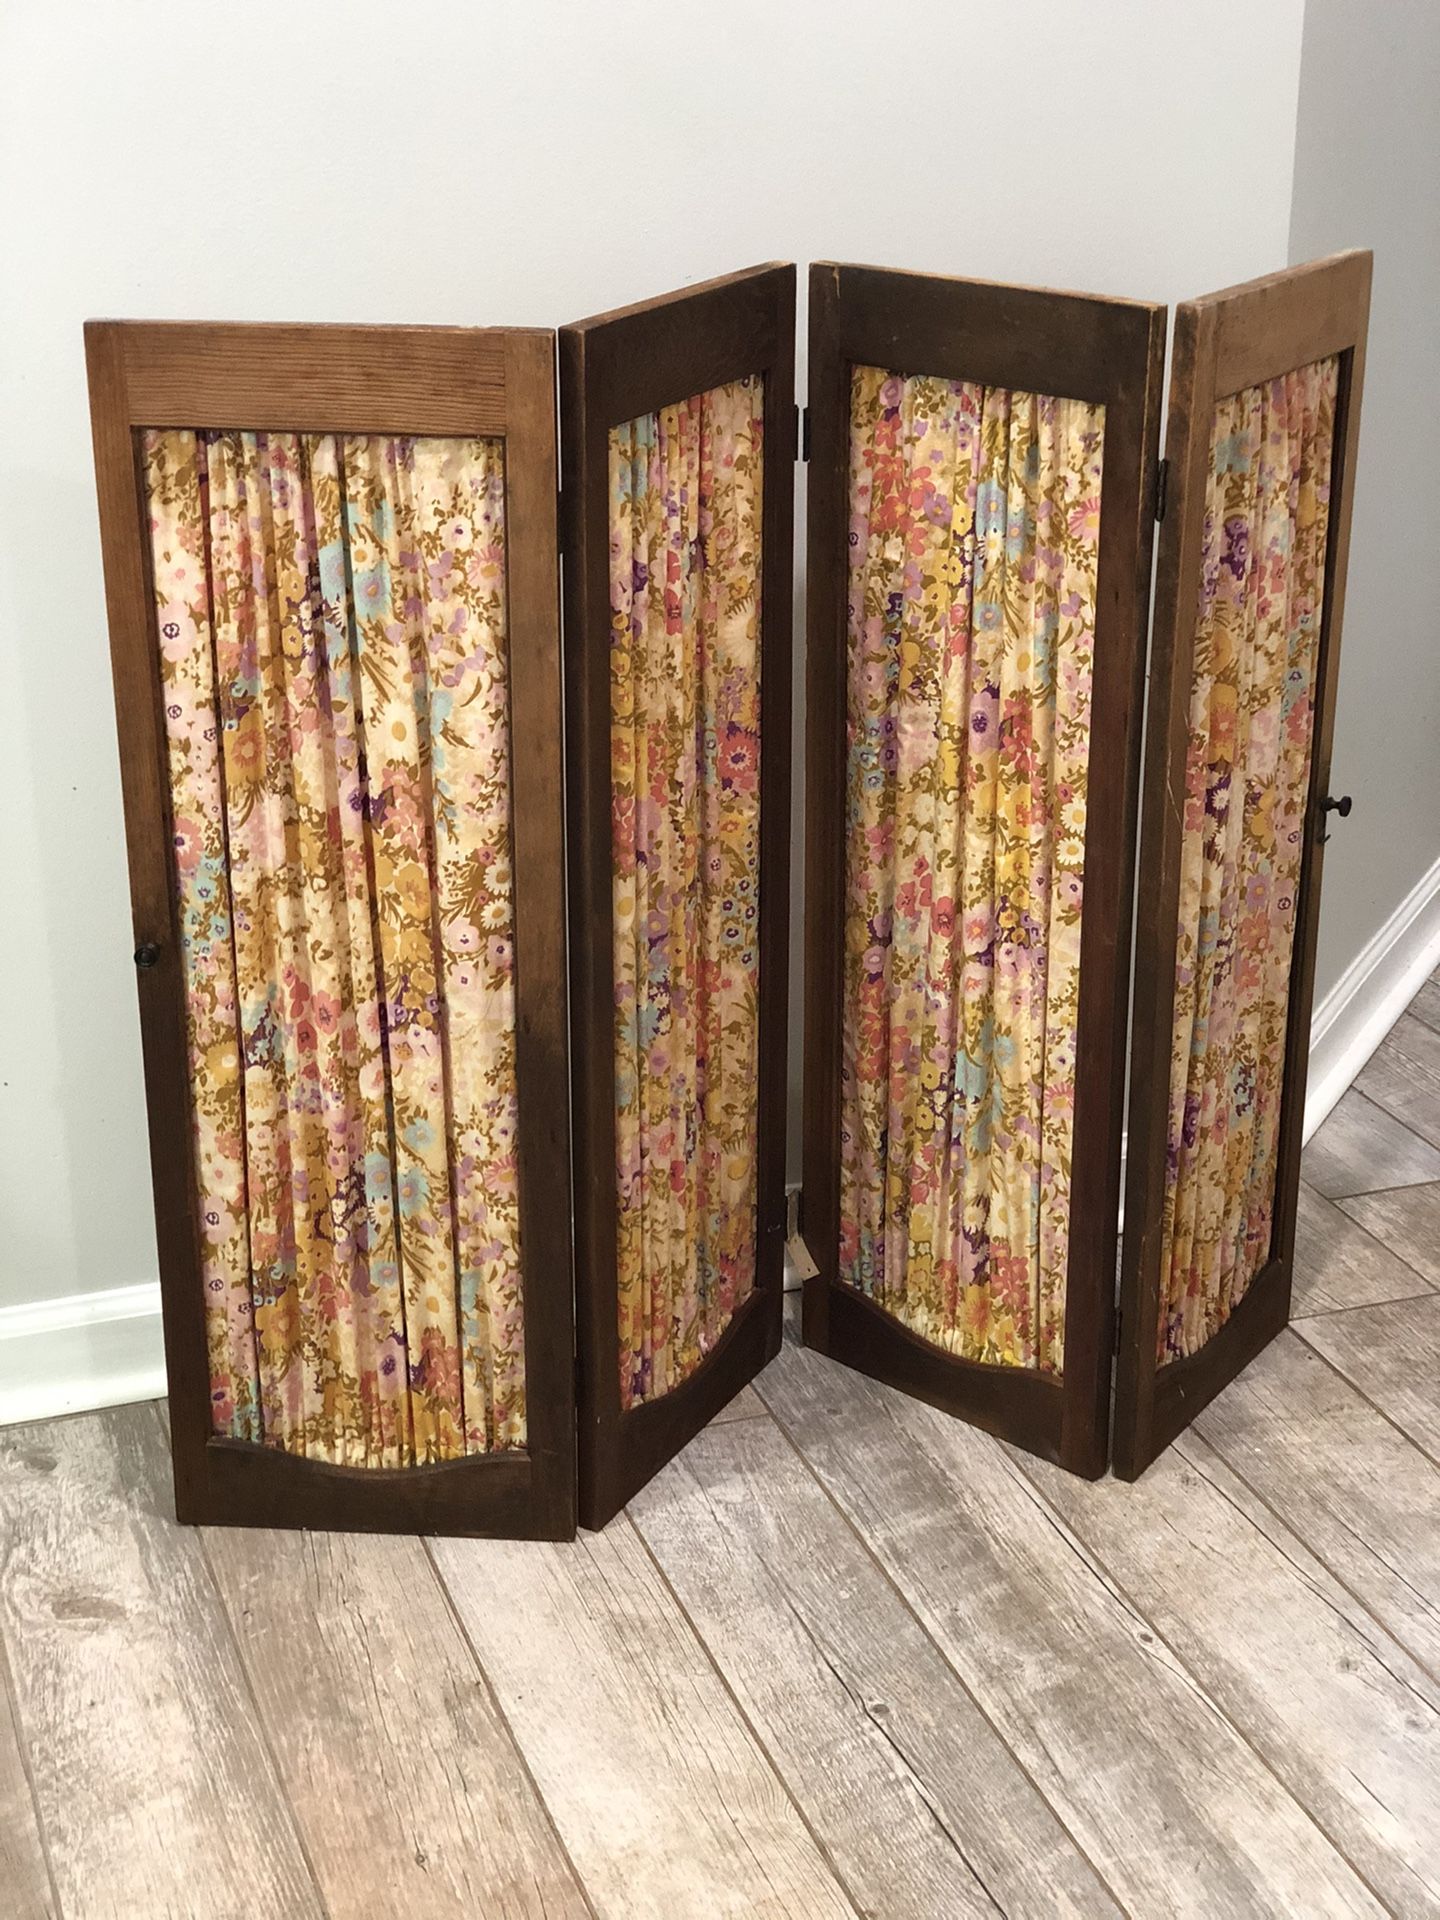 Shutters or craft boards